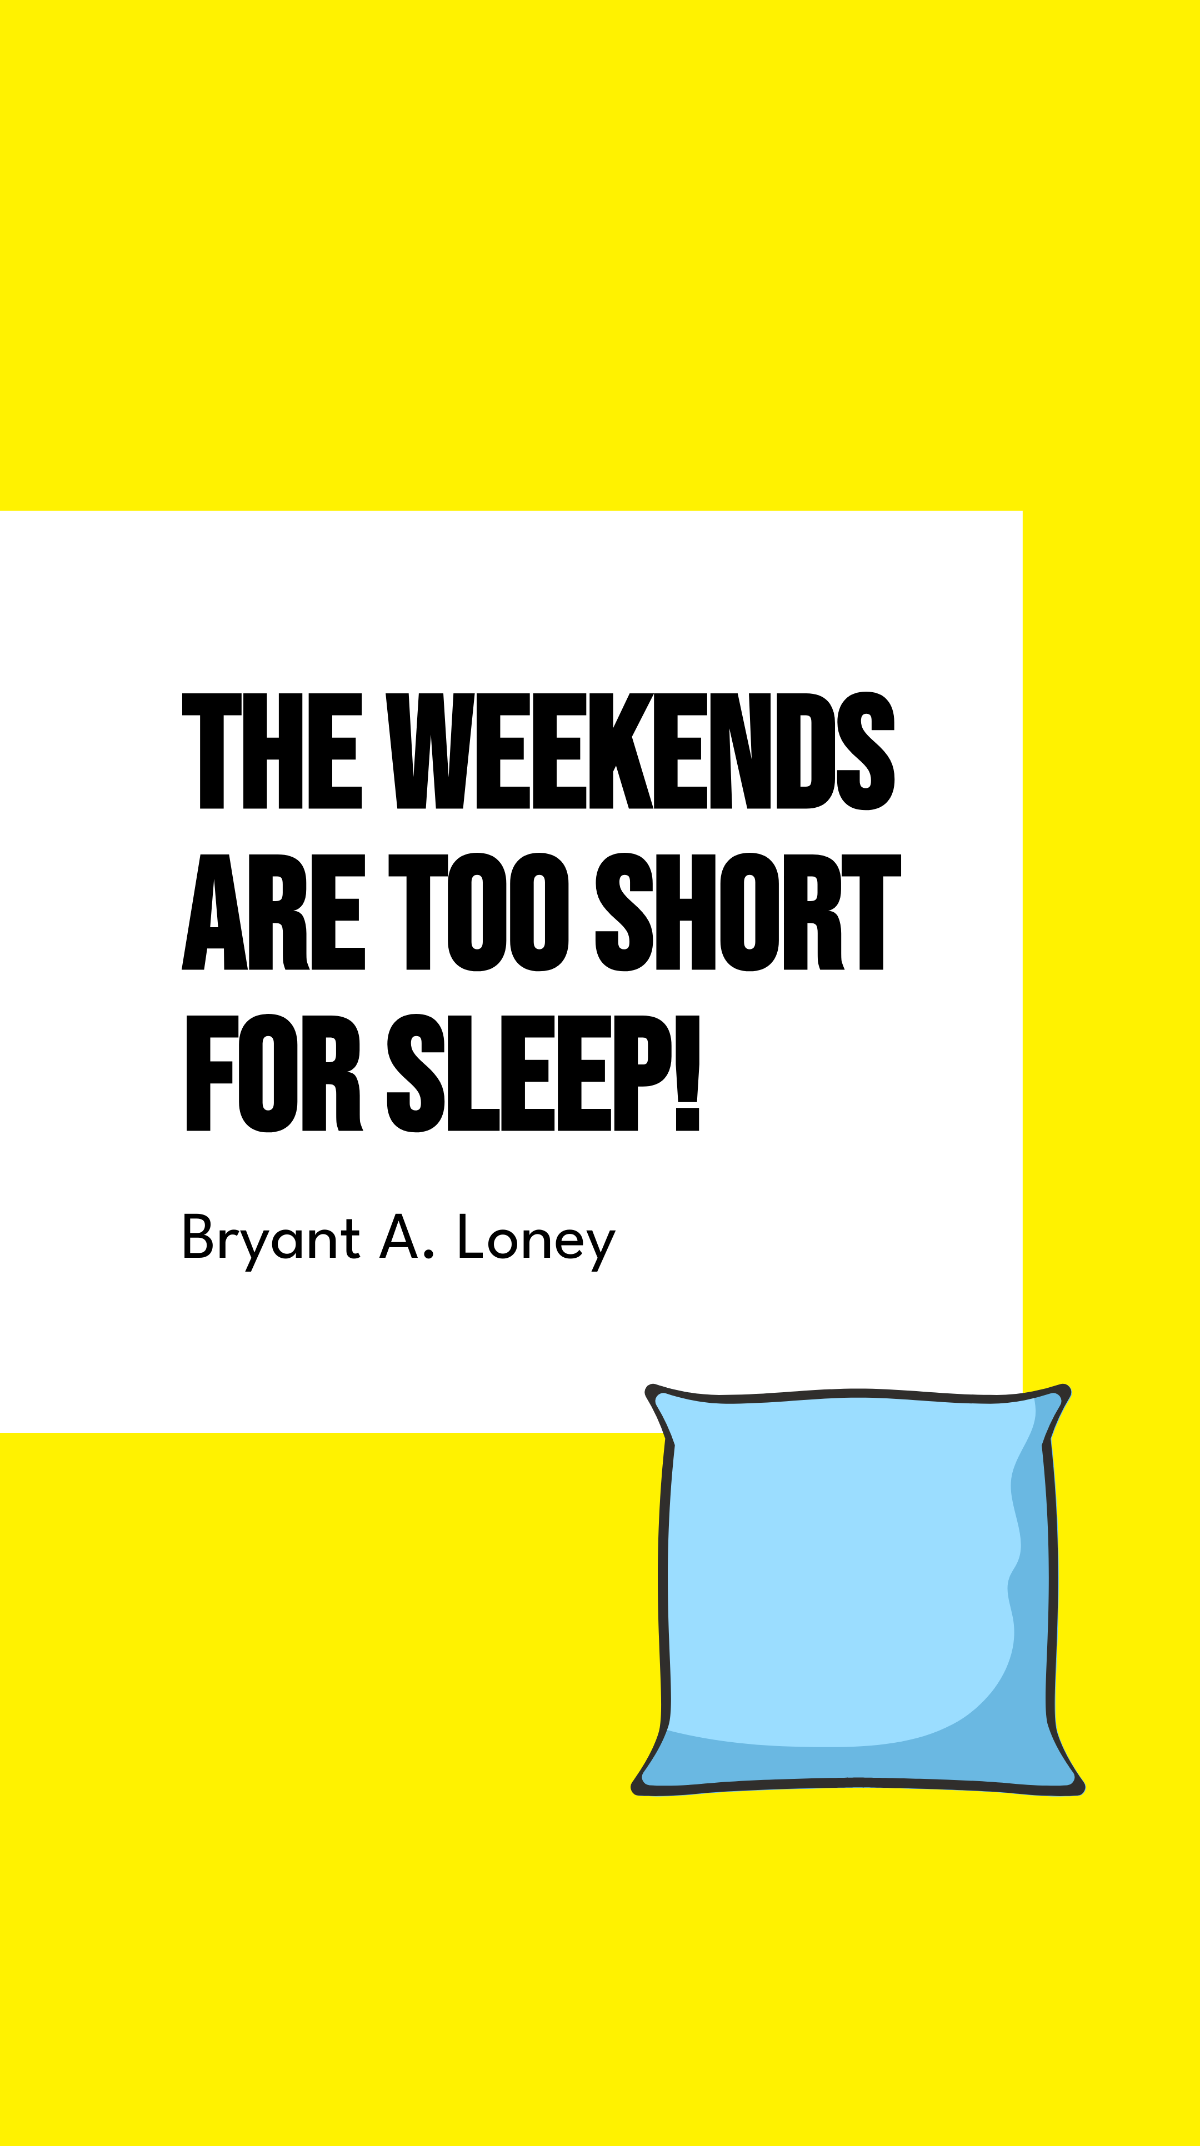 Bryant A. Loney - The weekends are too short for sleep! 